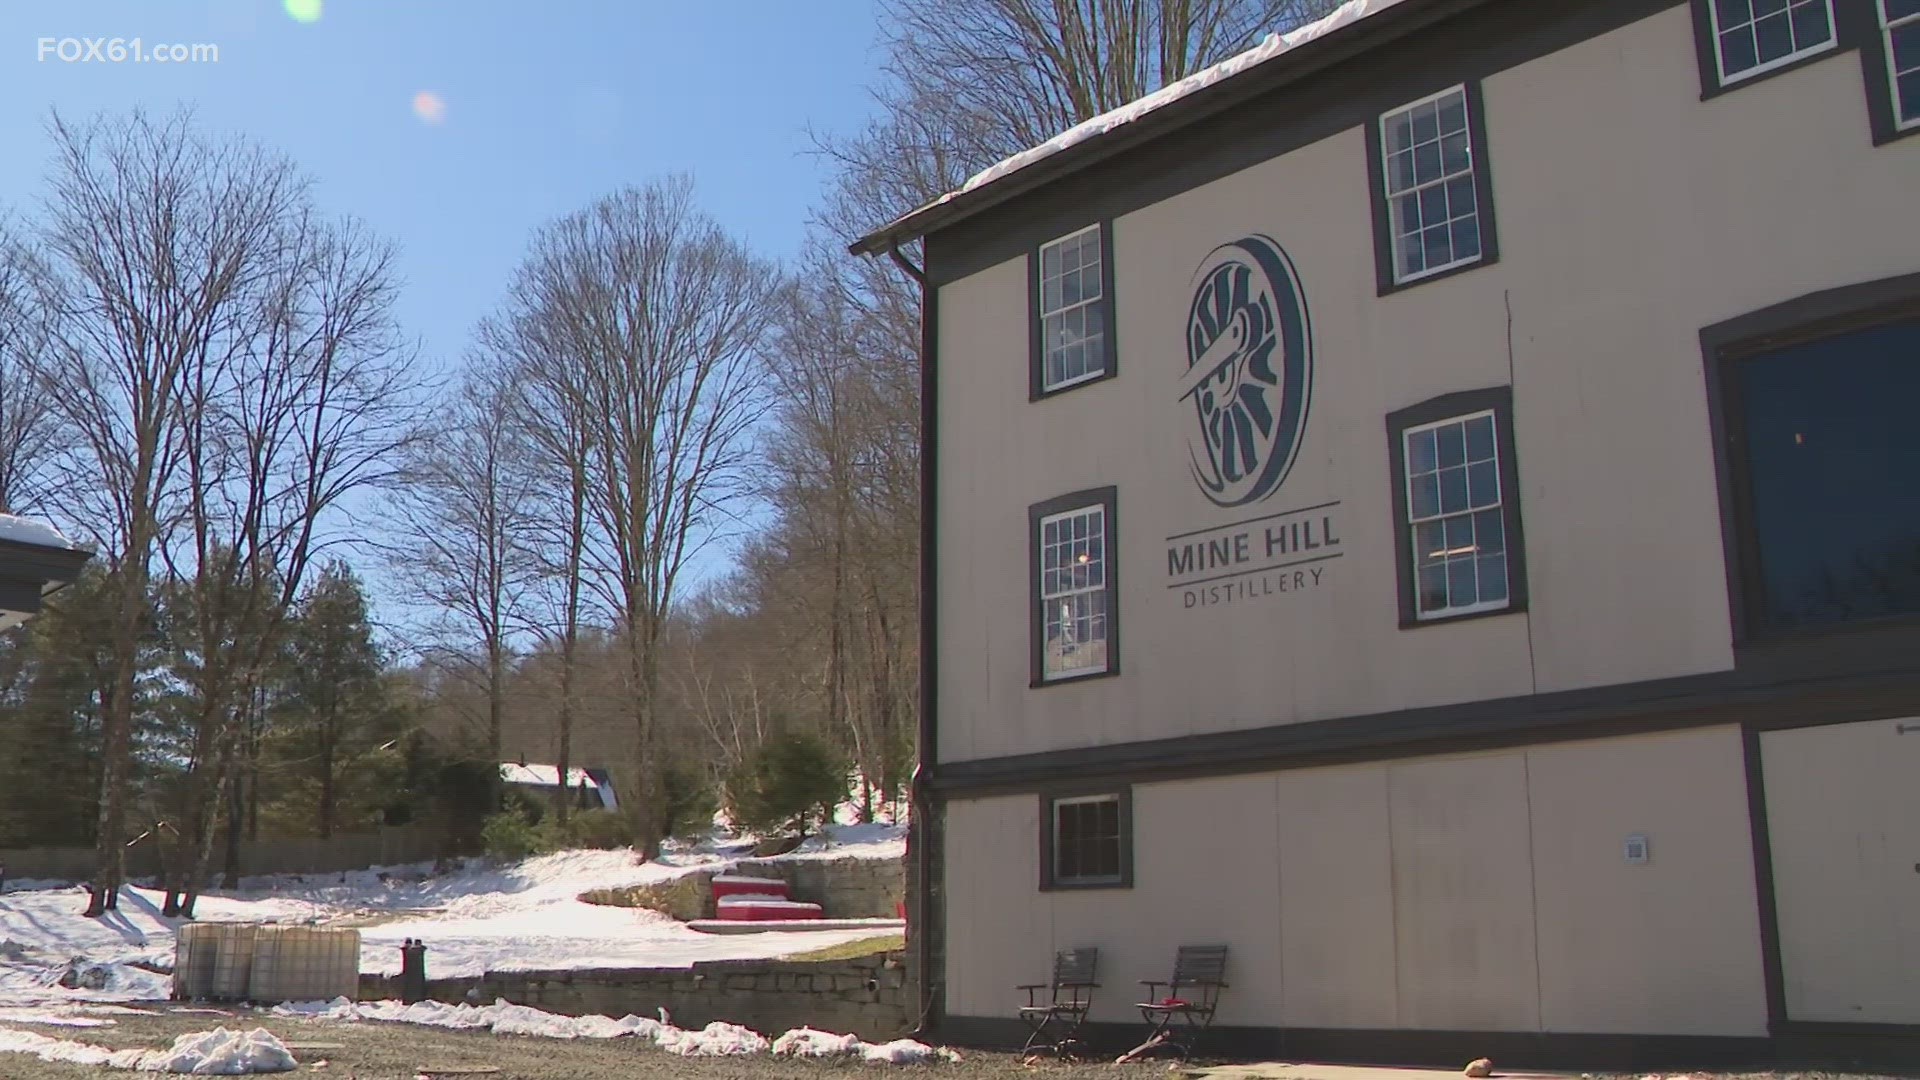 FOX61's Jim Altman visits the Mine Hill Distillery, where keeping things true to Connecticut is key.